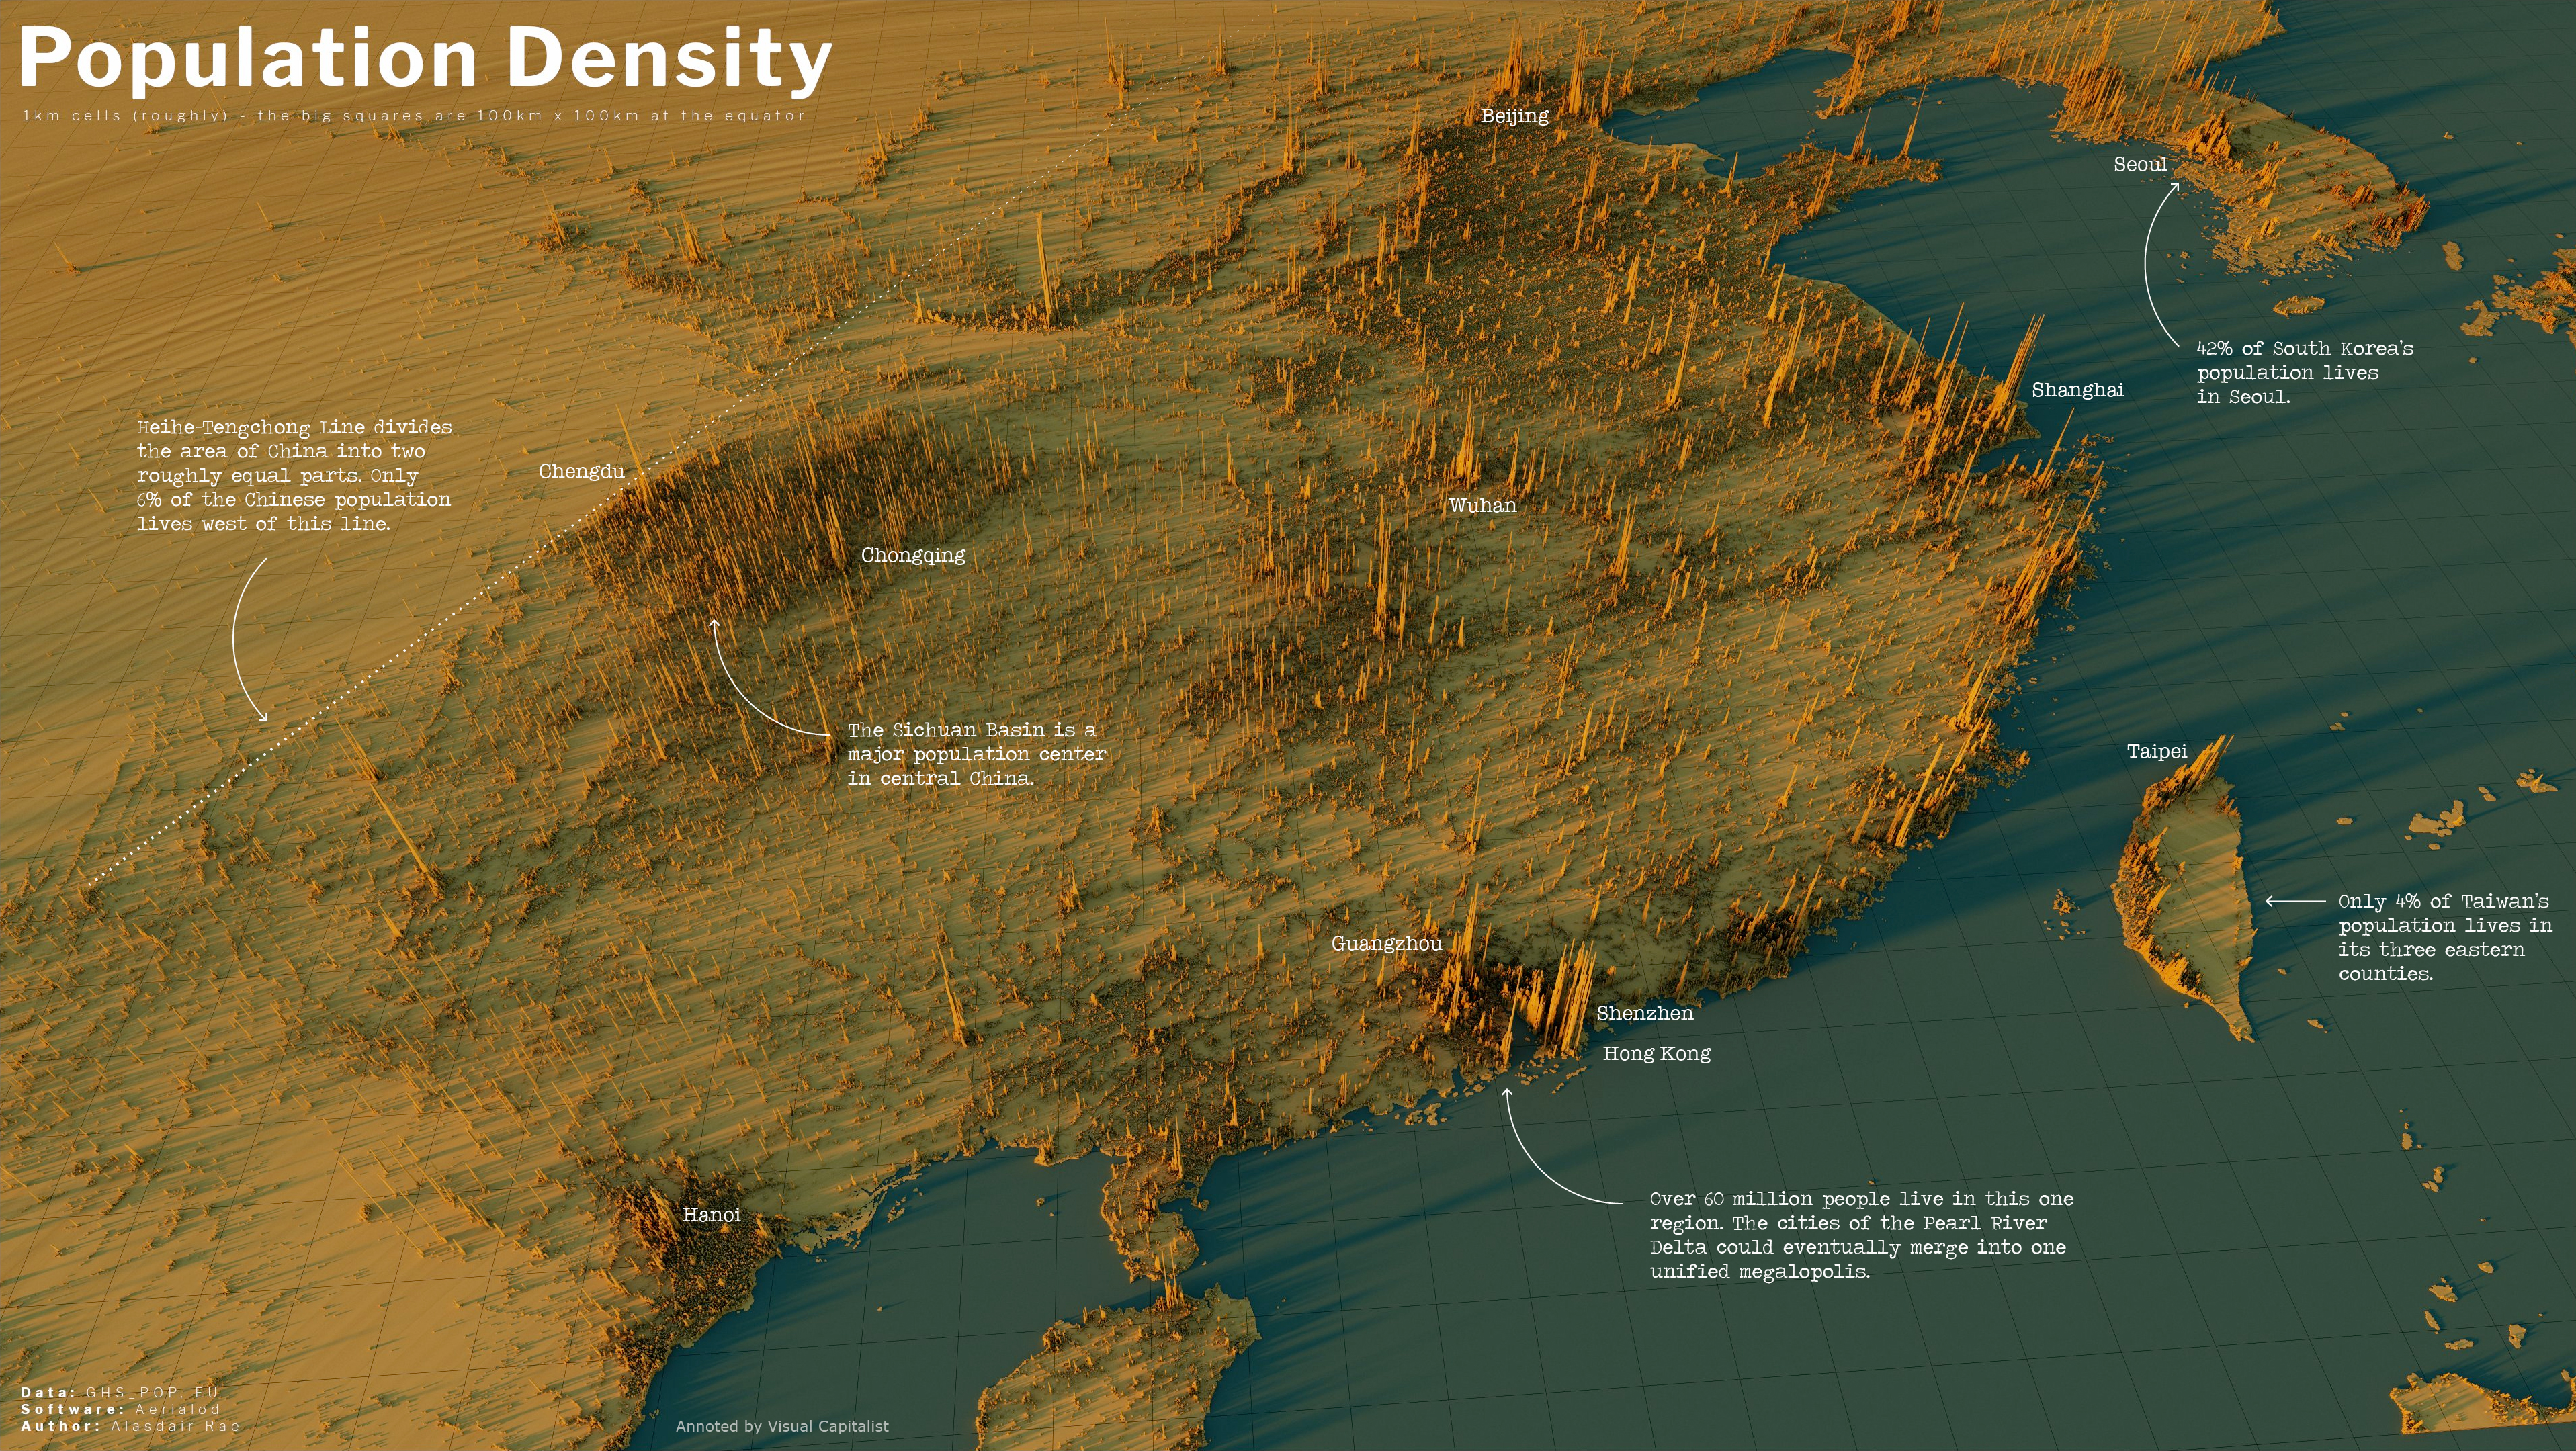 Map of China Population Density - Full Map